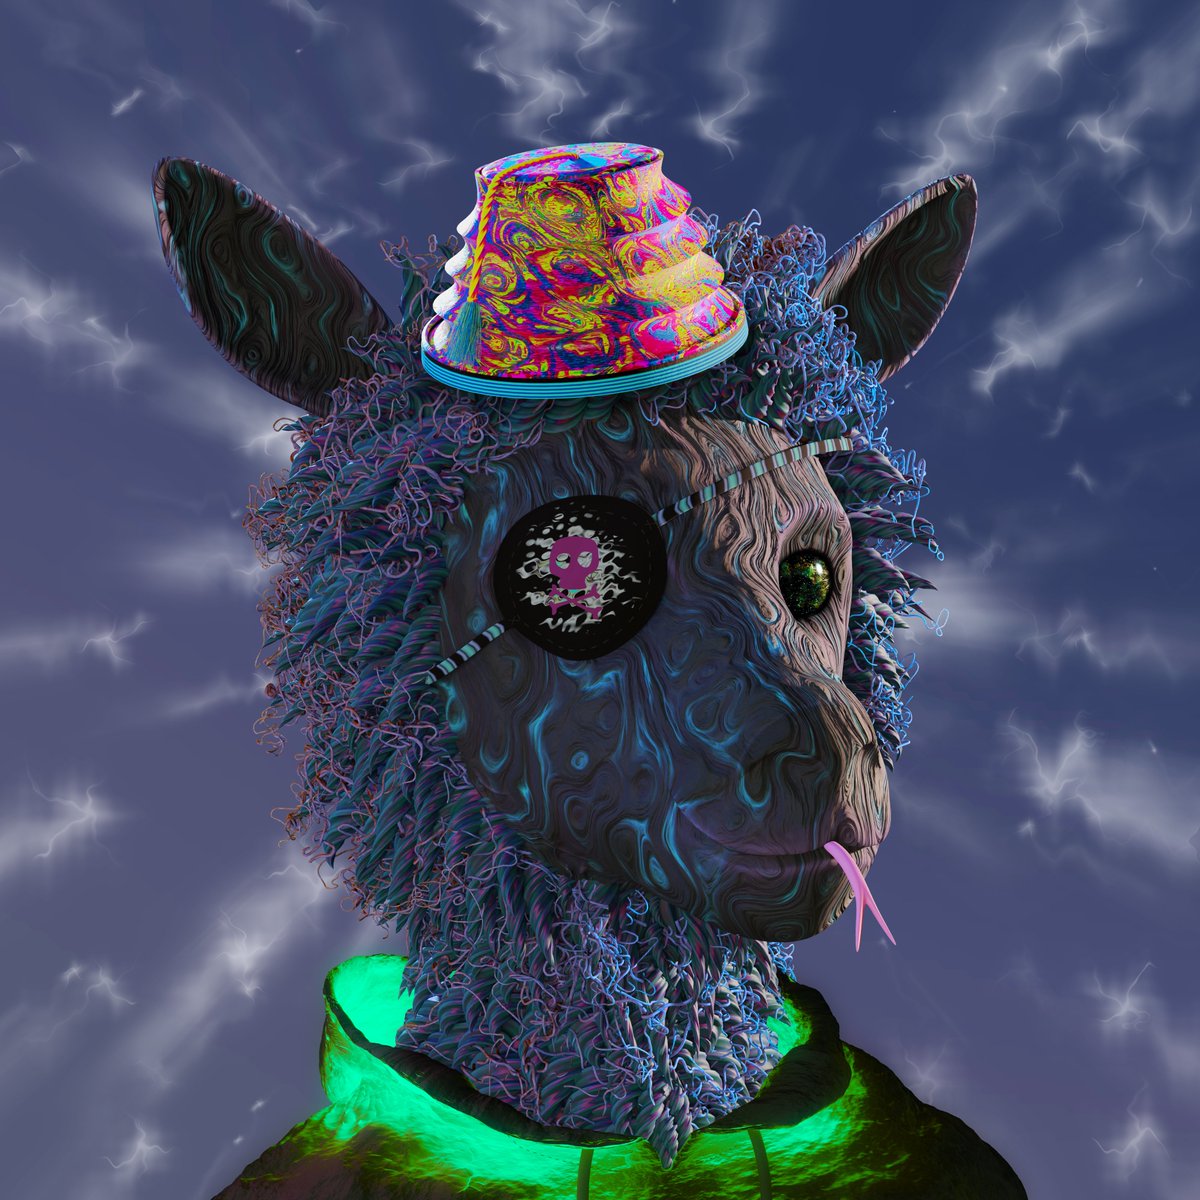 Who needs actual llamas when you can own a piece of their digital art? When @LazyLlamasCNFT has got llamas doing things you never thought possible(like this one right here a blend of serpent and llama) .Don’t miss out!
#NFT #LlamaHumor #Blockchain
@OvieSoko @JeffKoons @_rglng